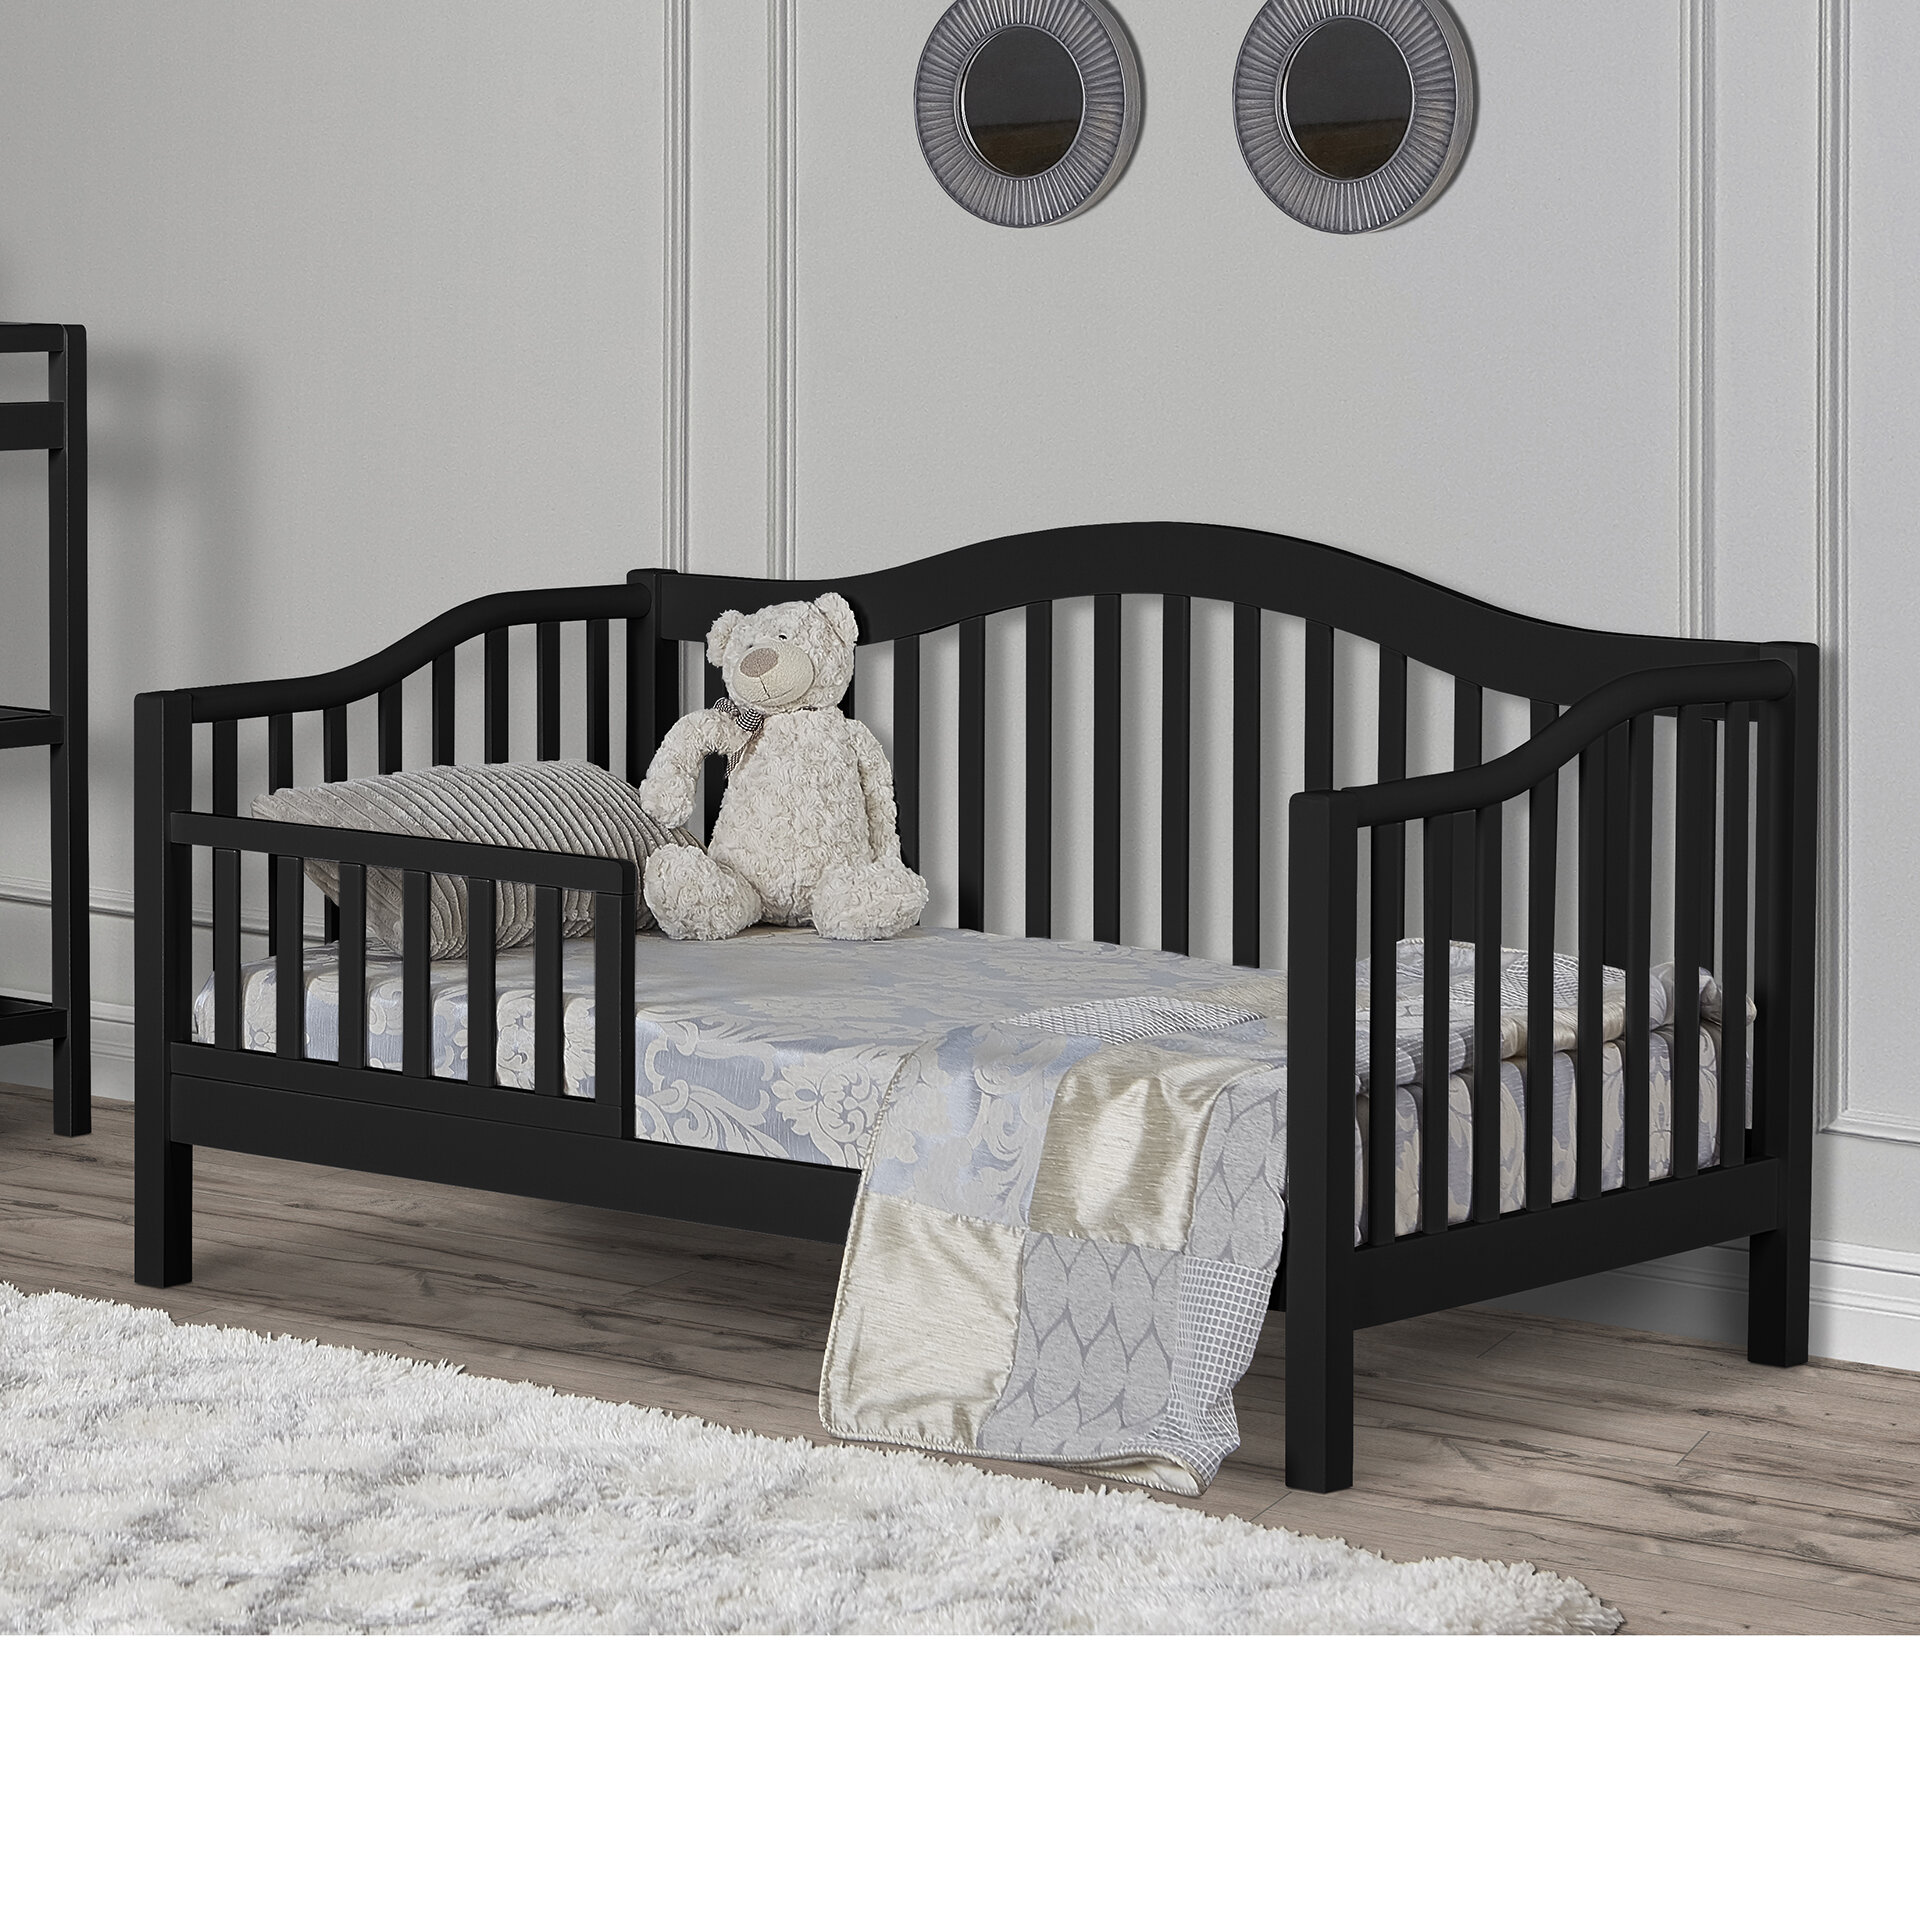 beds for 1 year olds